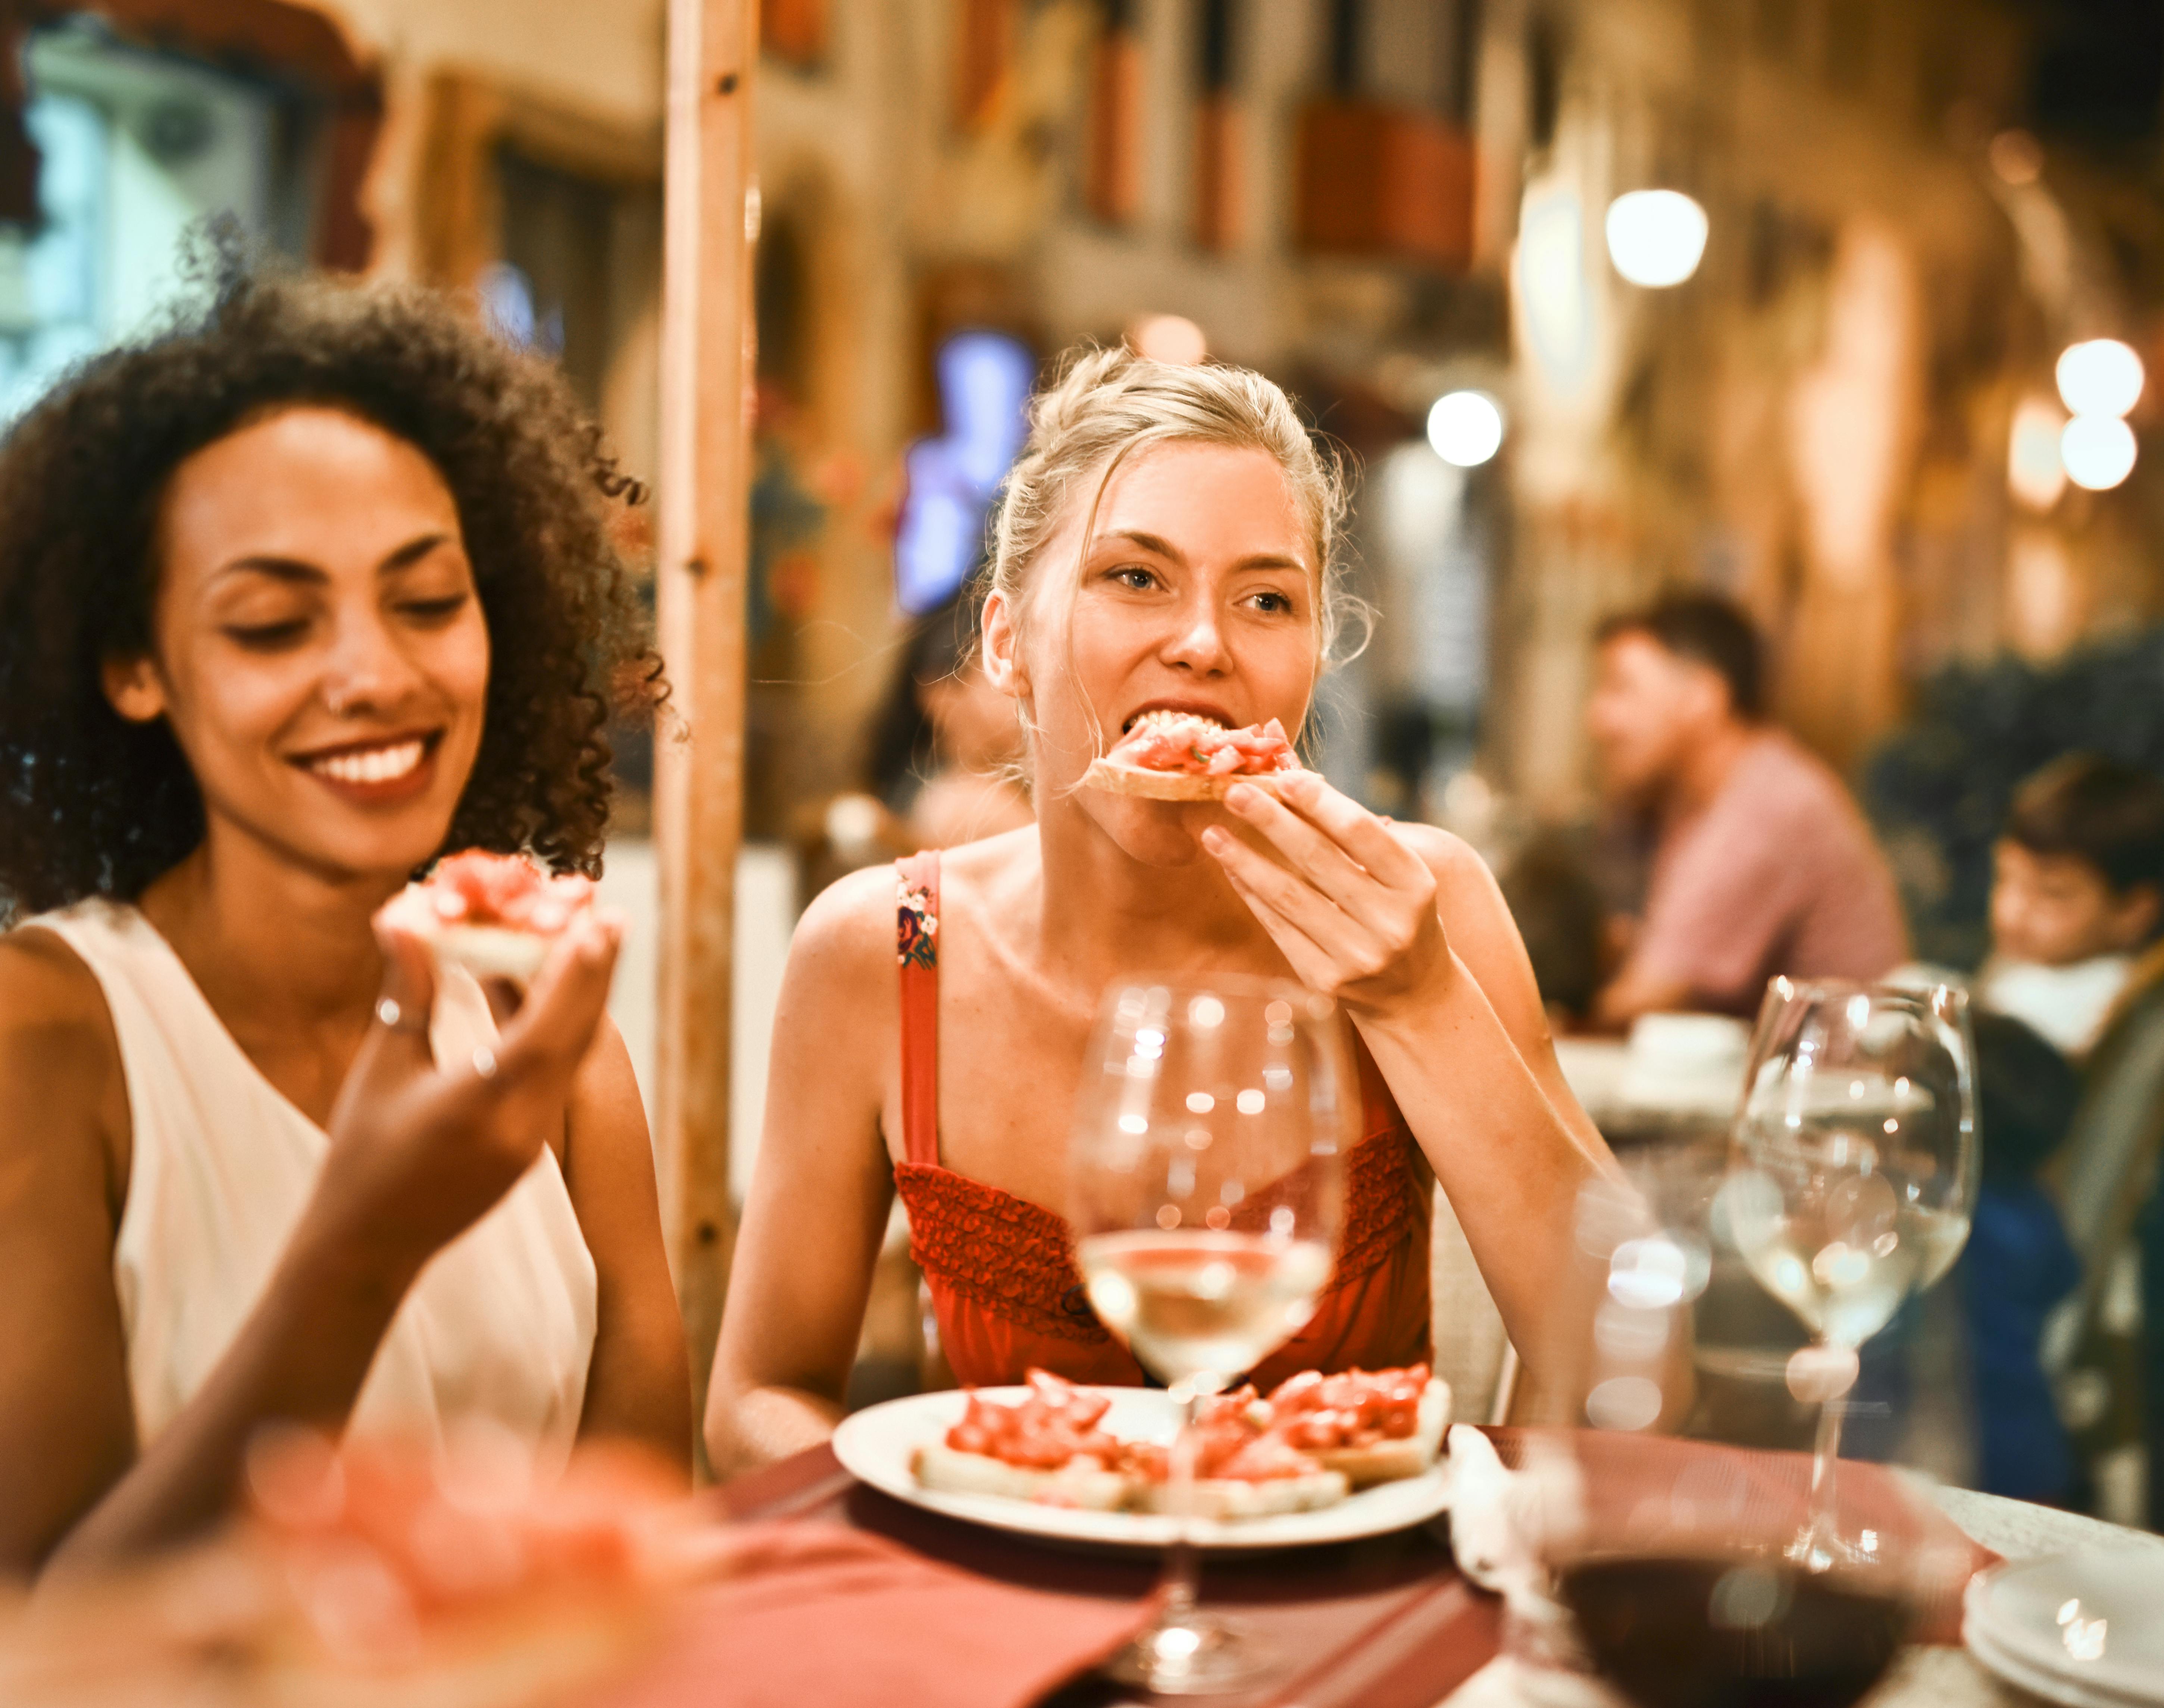 Women having a meal at a restaurant | Source: Pexels